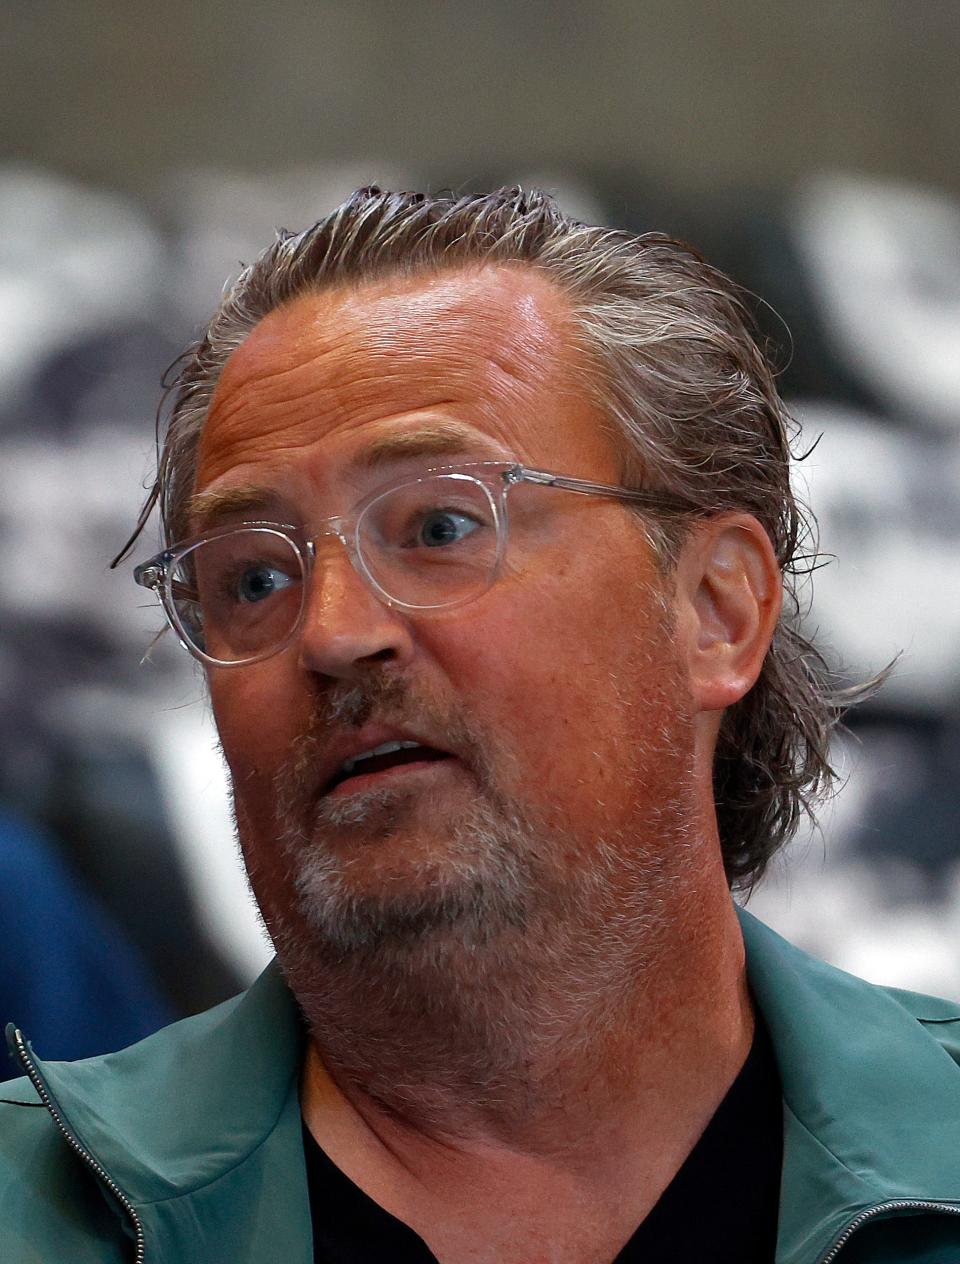 Matthew Perry attends a game between the Edmonton Oilers and the Los Angeles Kings in the first round of the Stanley Cup playoffs at Crypto.com Arena on April 29, 2023 in Los Angeles, California.